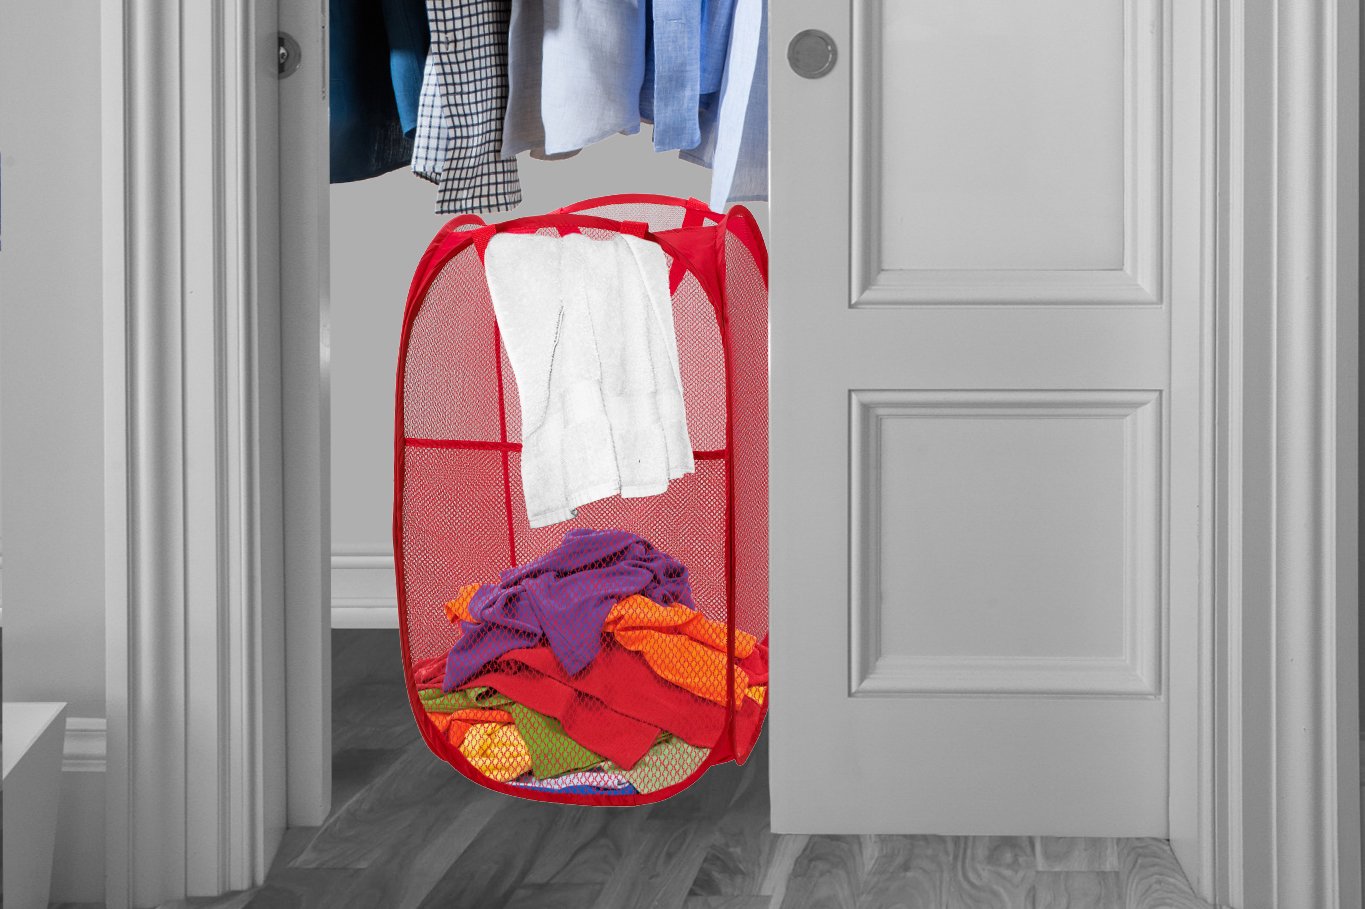 Mesh Popup Laundry Hamper - Portable, Durable Handles, Collapsible for Storage and Easy to Open. Folding Pop-Up Clothes Hampers are Great for The Kids Room, College Dorm or Travel. (Red)